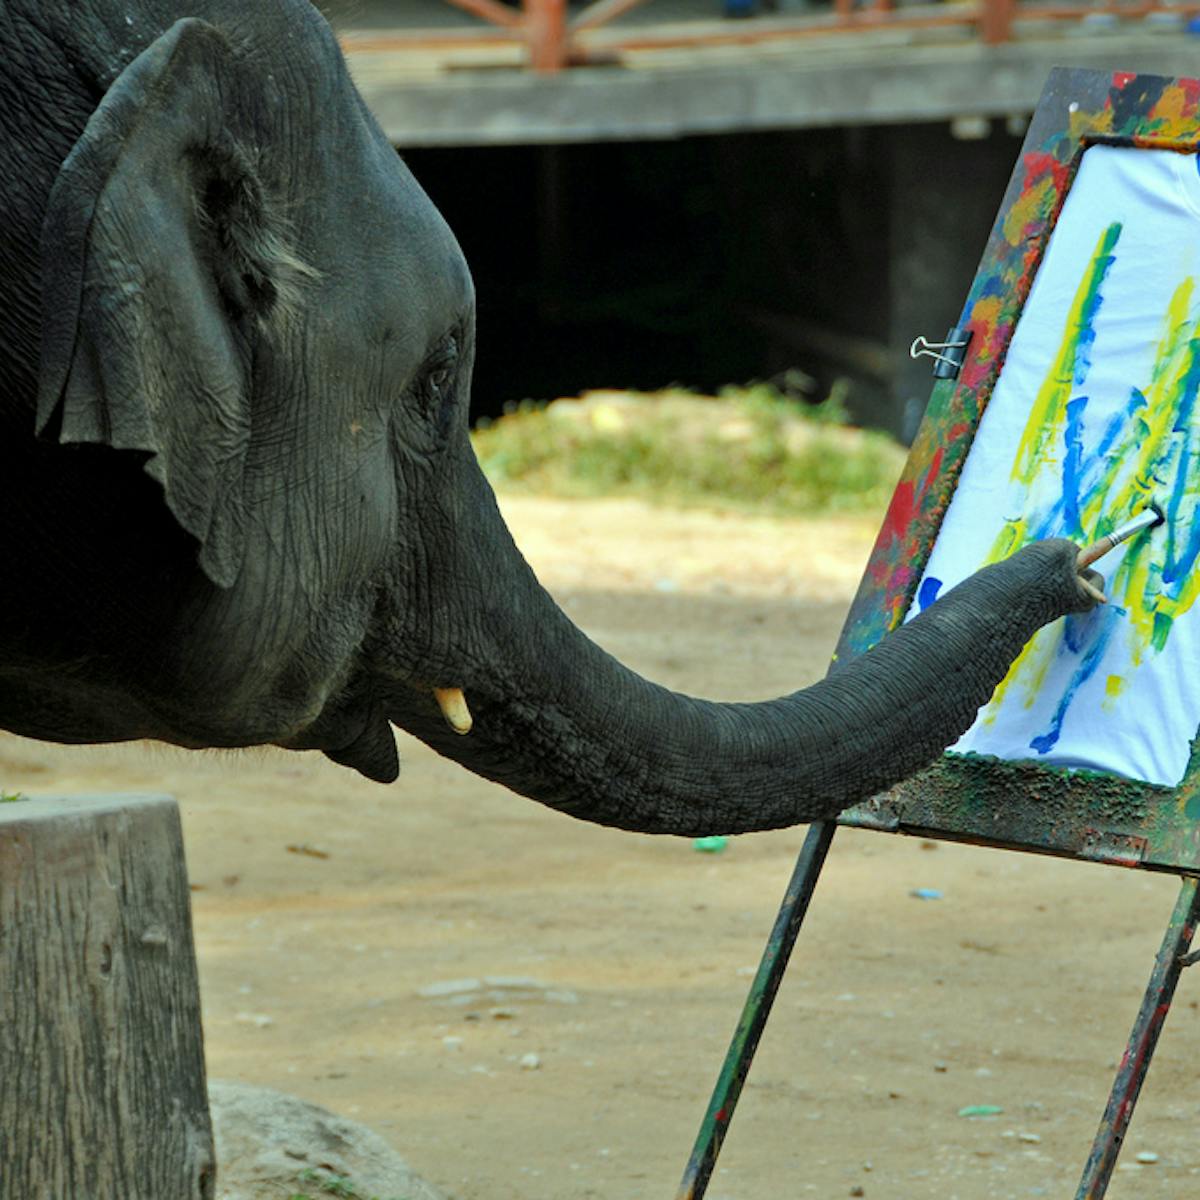 Can animals ever be artists?